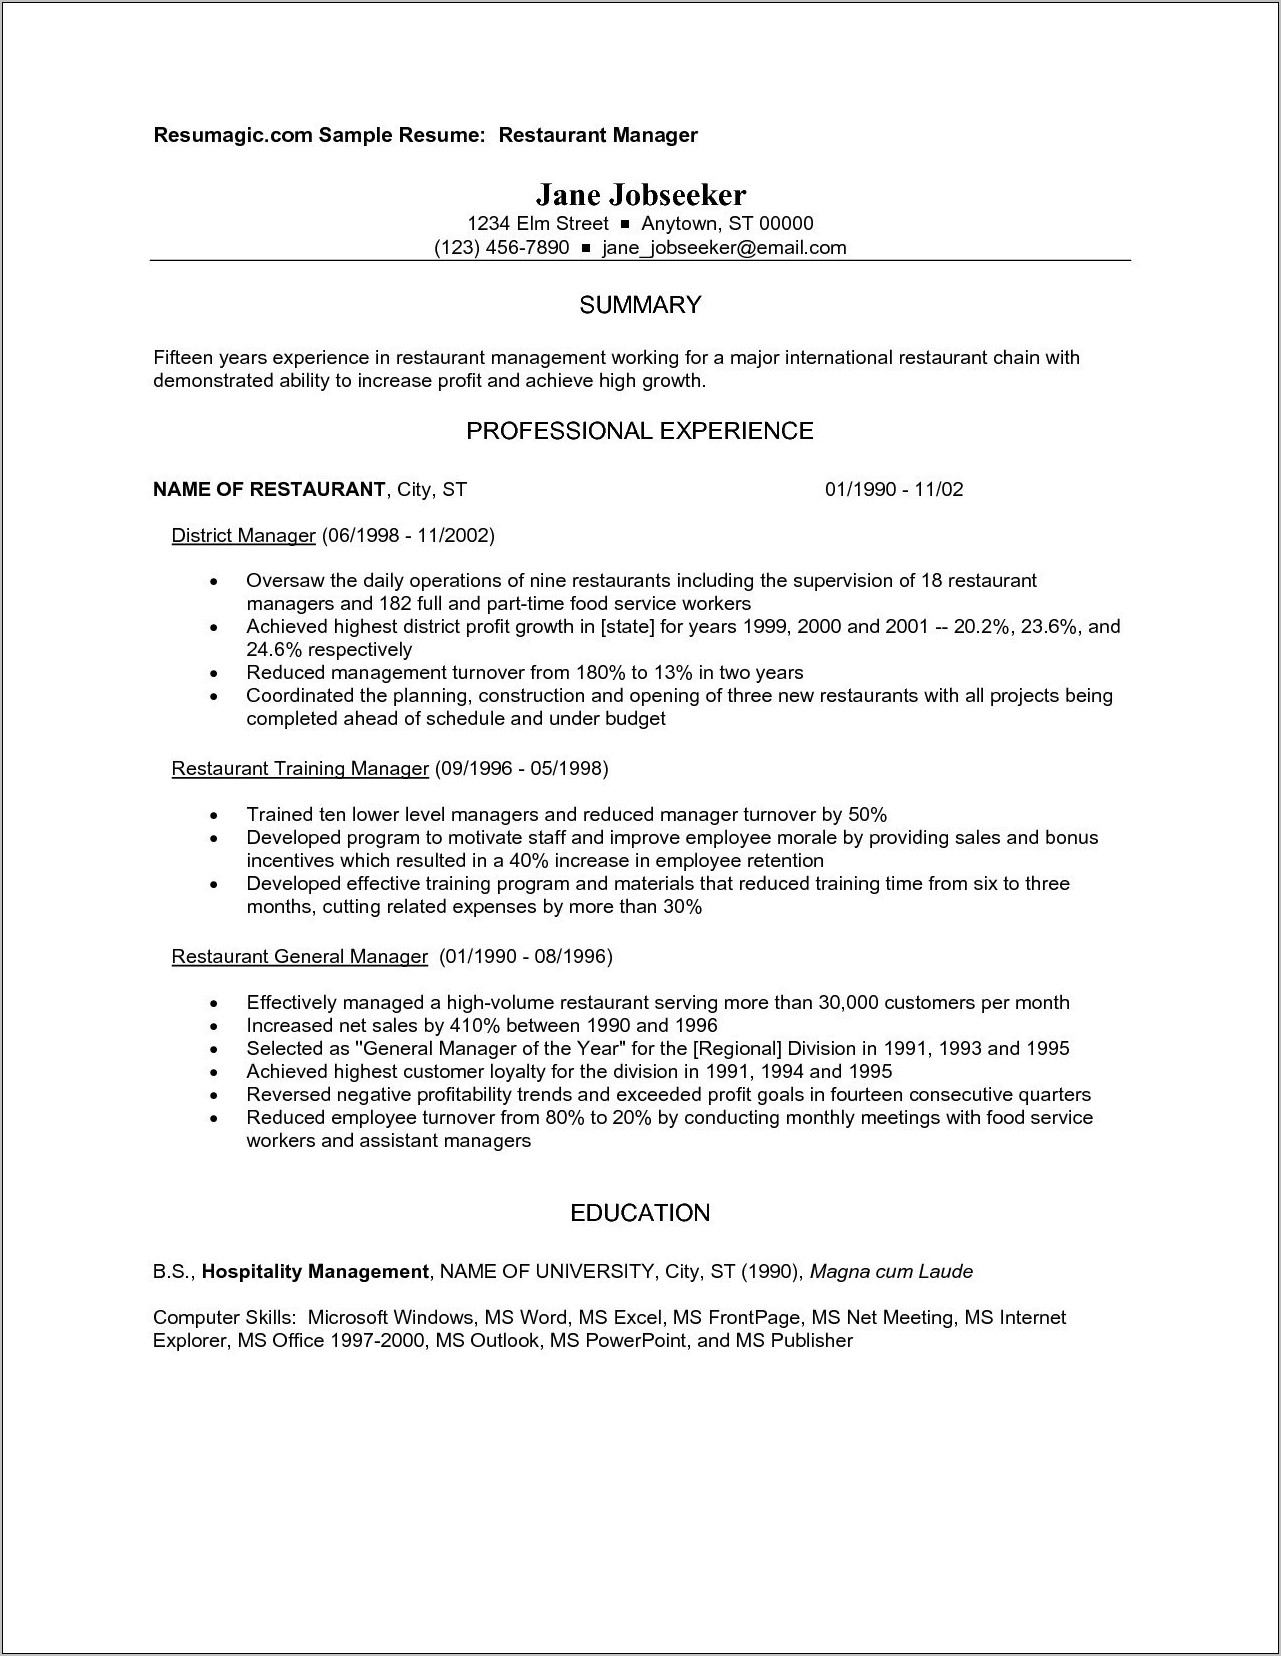 Resume Templates For Managers